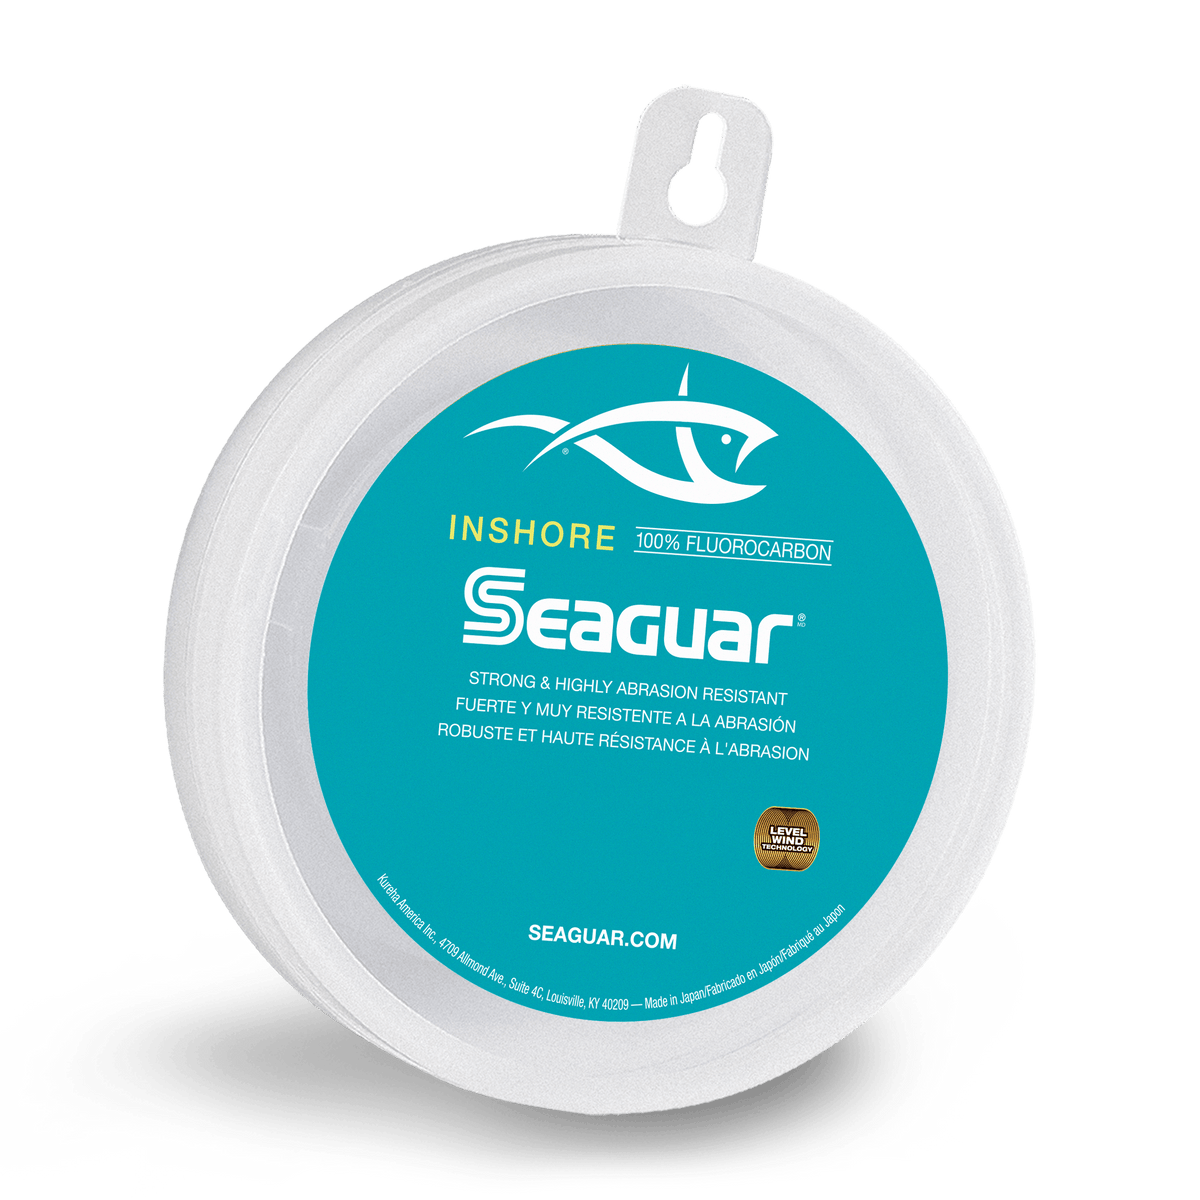 Seaguar Inshore Fluorocarbon Leader – Strong and Highly Abrasion Resistant,  Excellent Impact and Knot Strength, Fast Sinking and Virtually Invisible